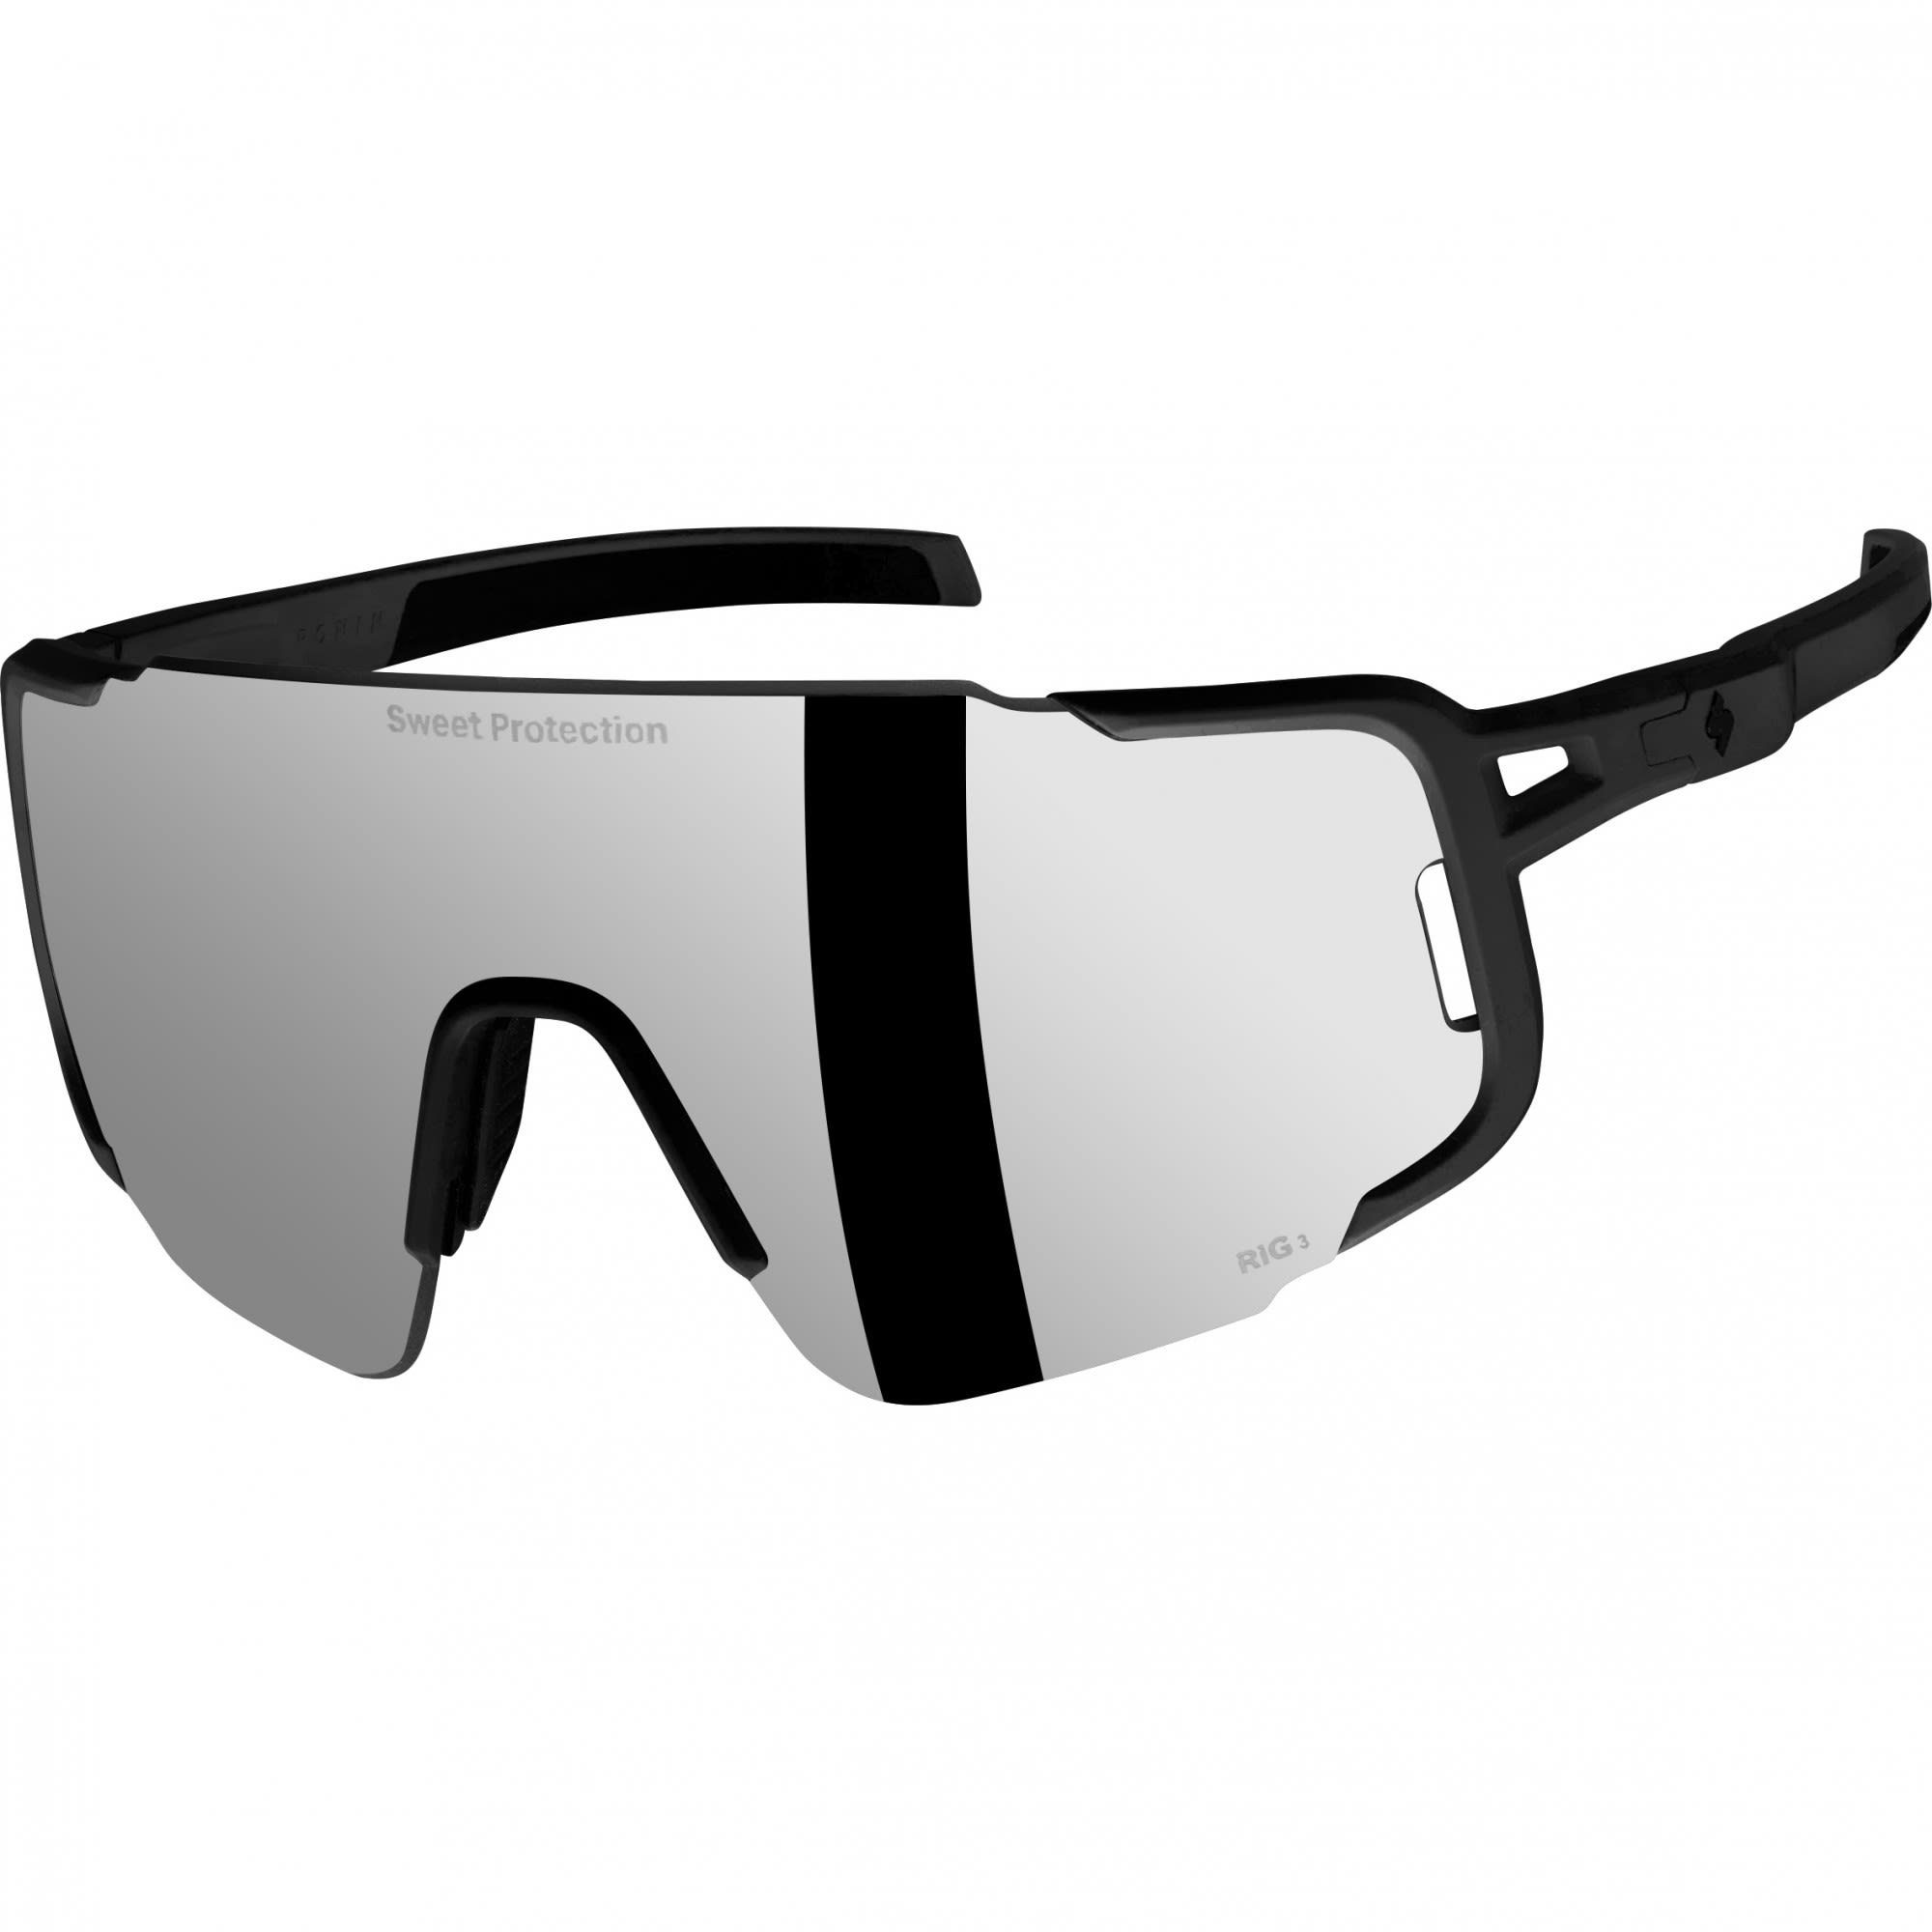 Sweet Protection Fahrradbrille Sweet Protection Ronin Max Rig Reflect Accessoires RIG Obsidian - Matte Black